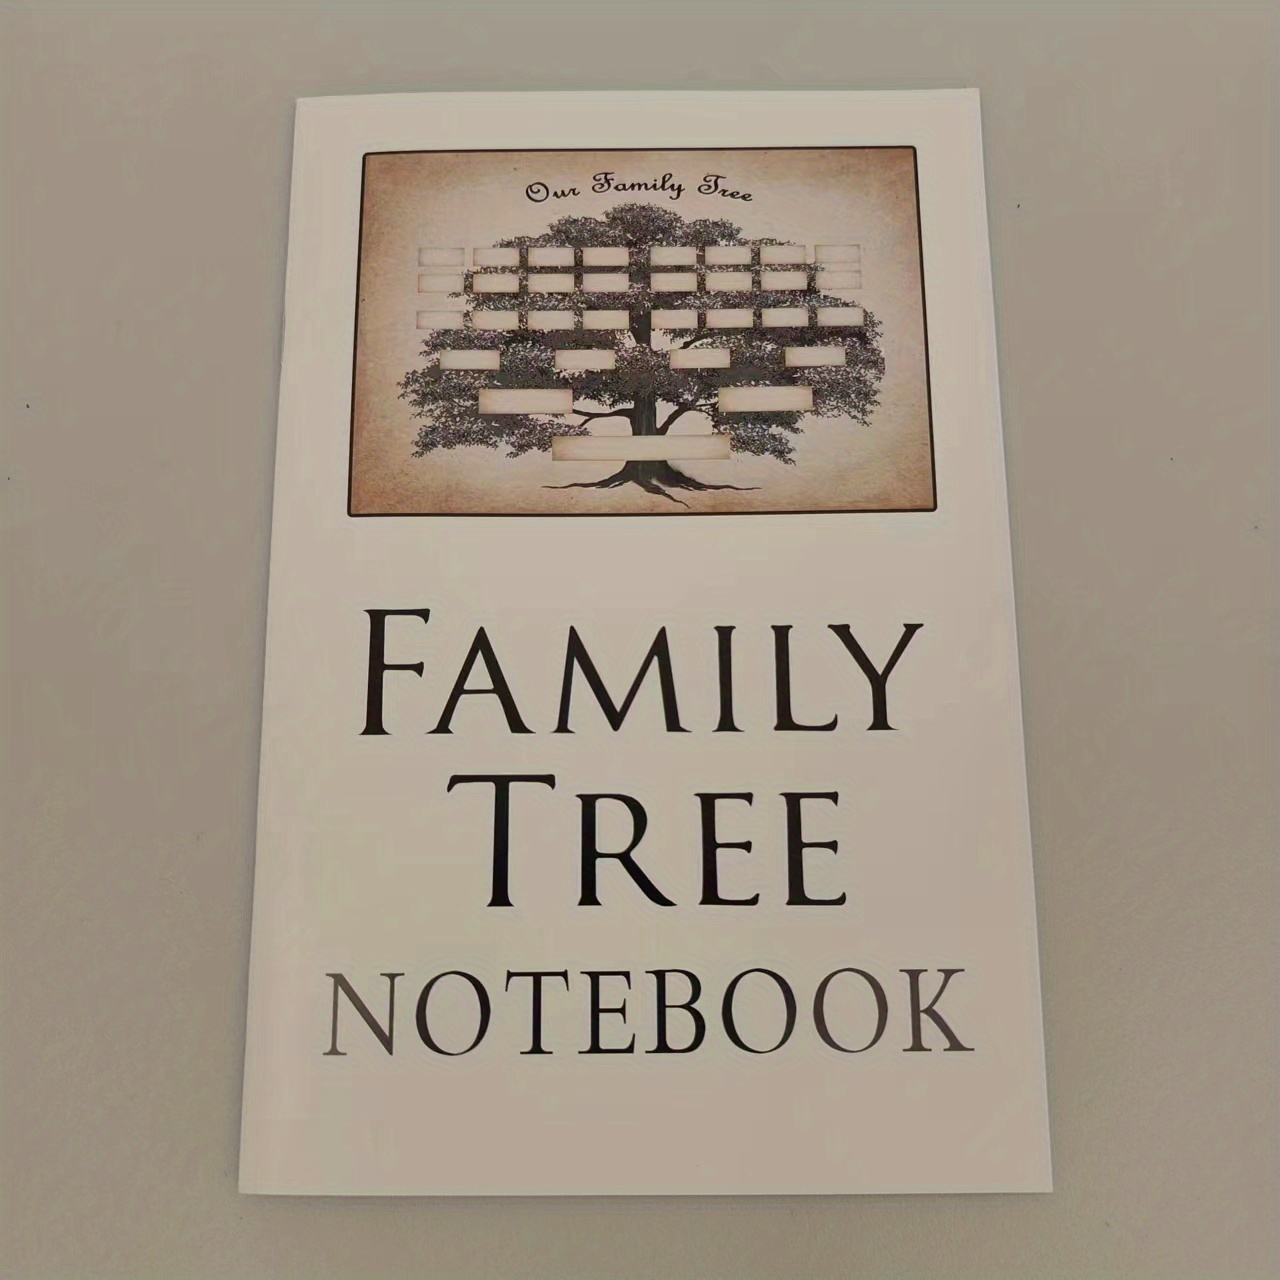 Our Family Tree Index: A 12 Generation Genealogy Notebook for 4,095 Ancestors